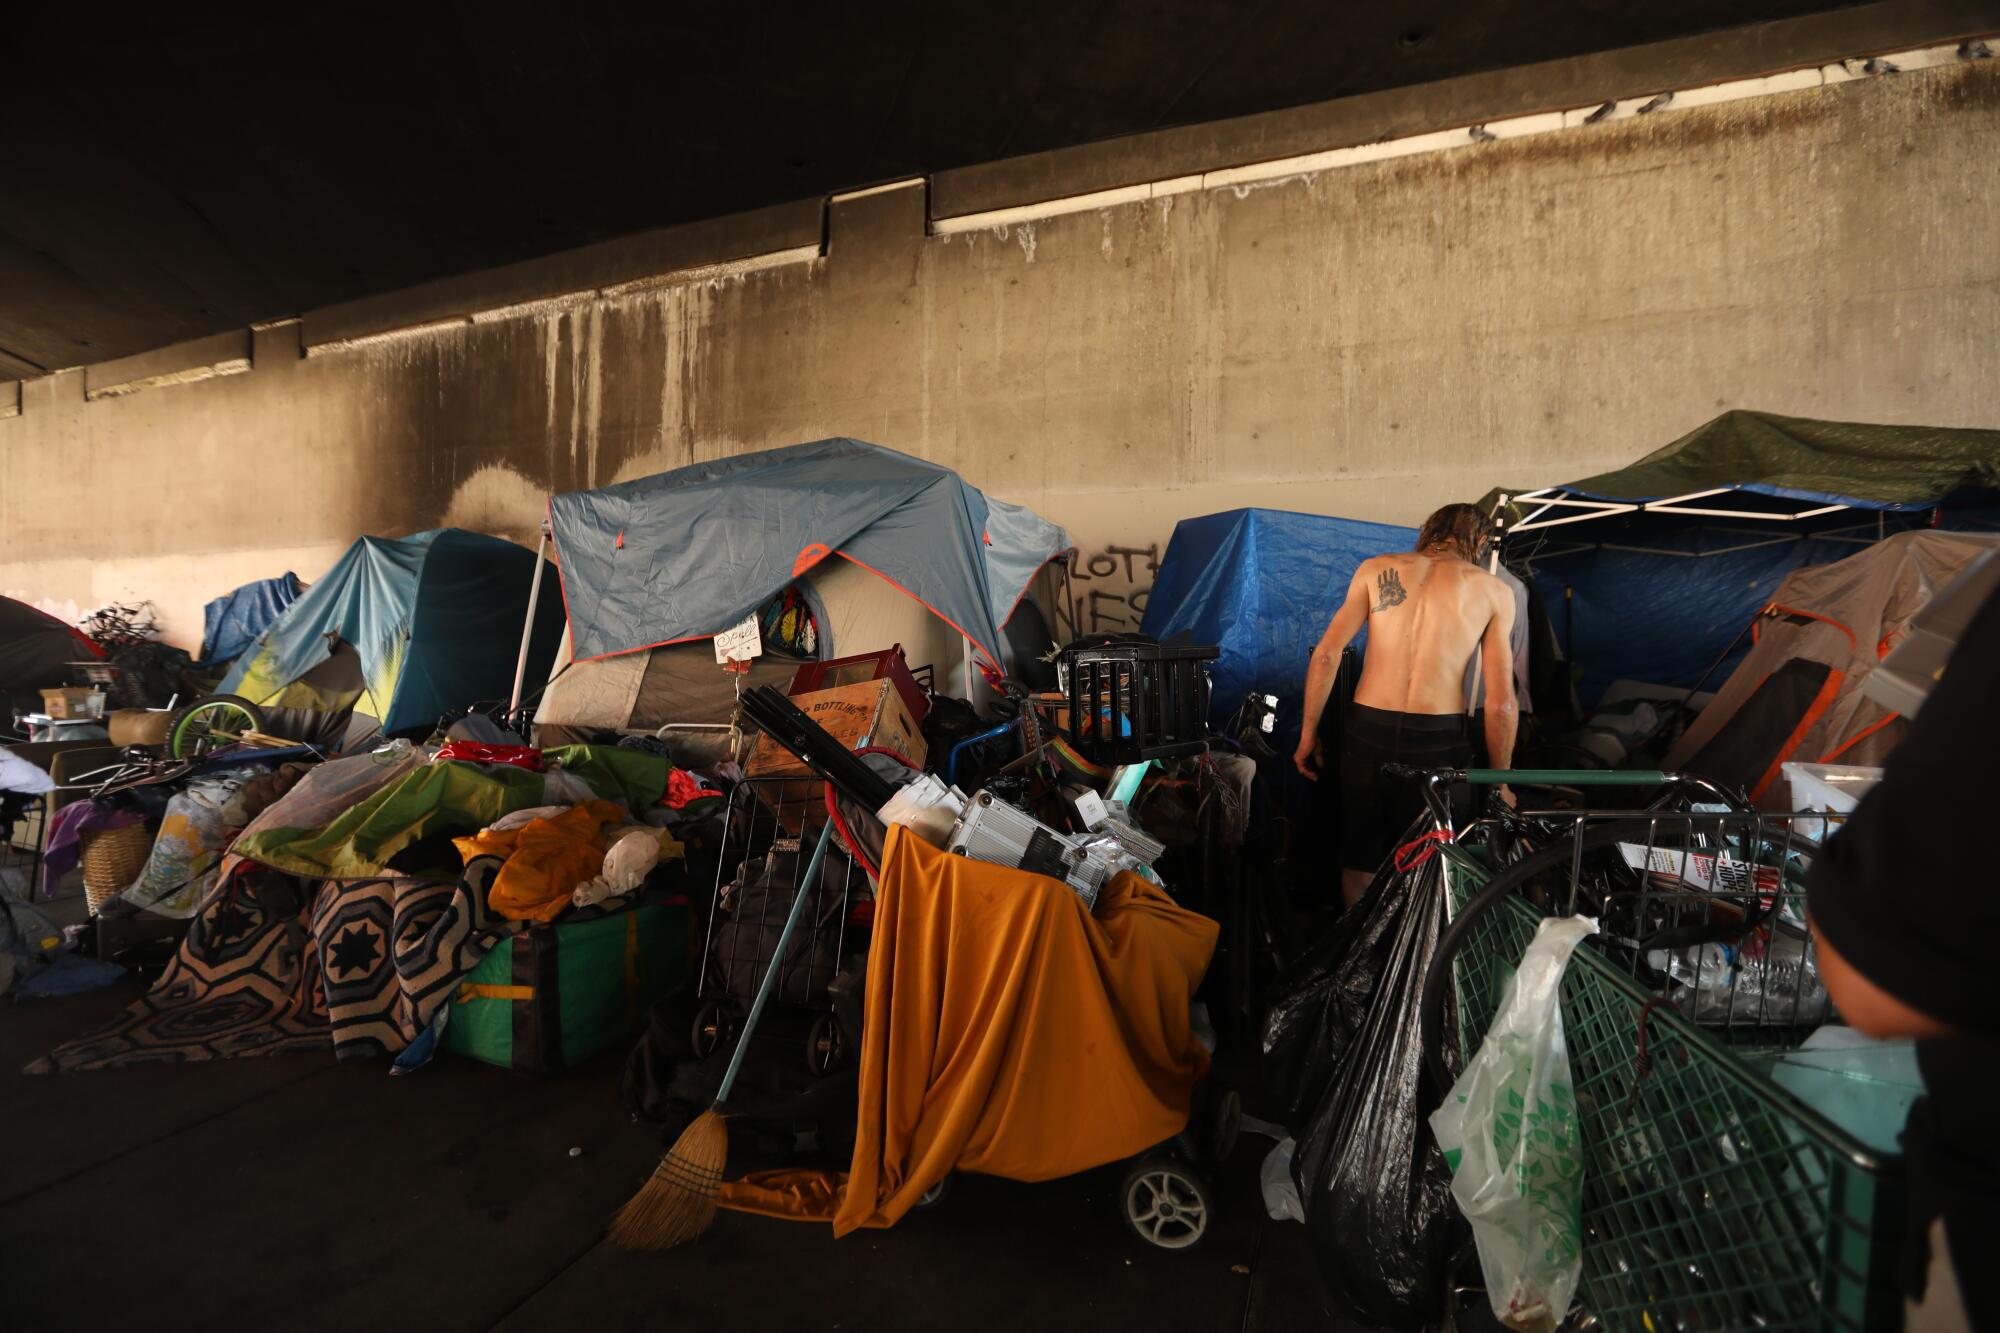 A homeless encampment under the 134 Freeway in North Hollywood.